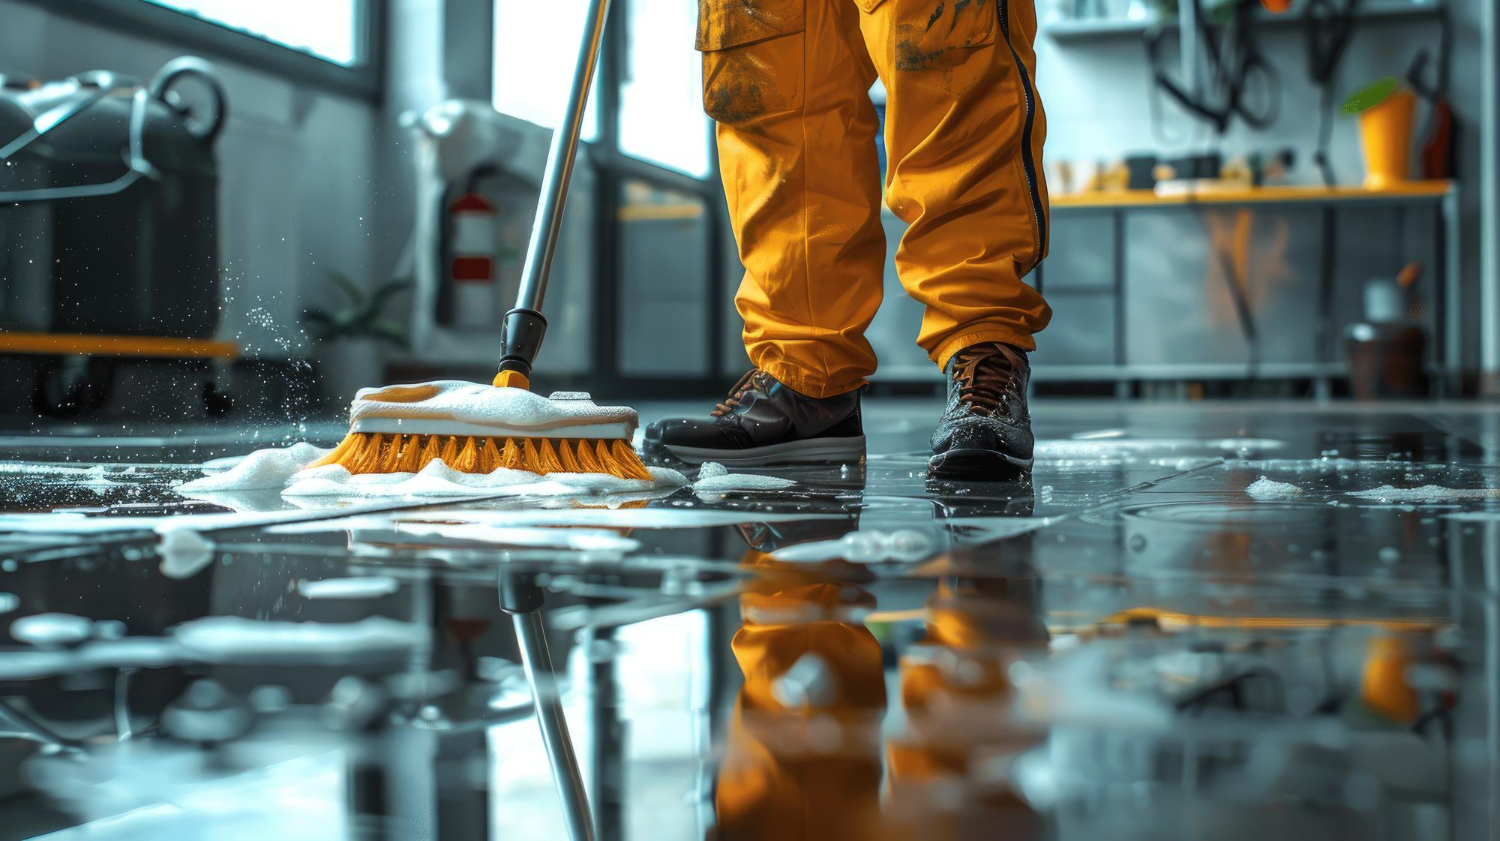 Janitor cleaning shiny floor close-up